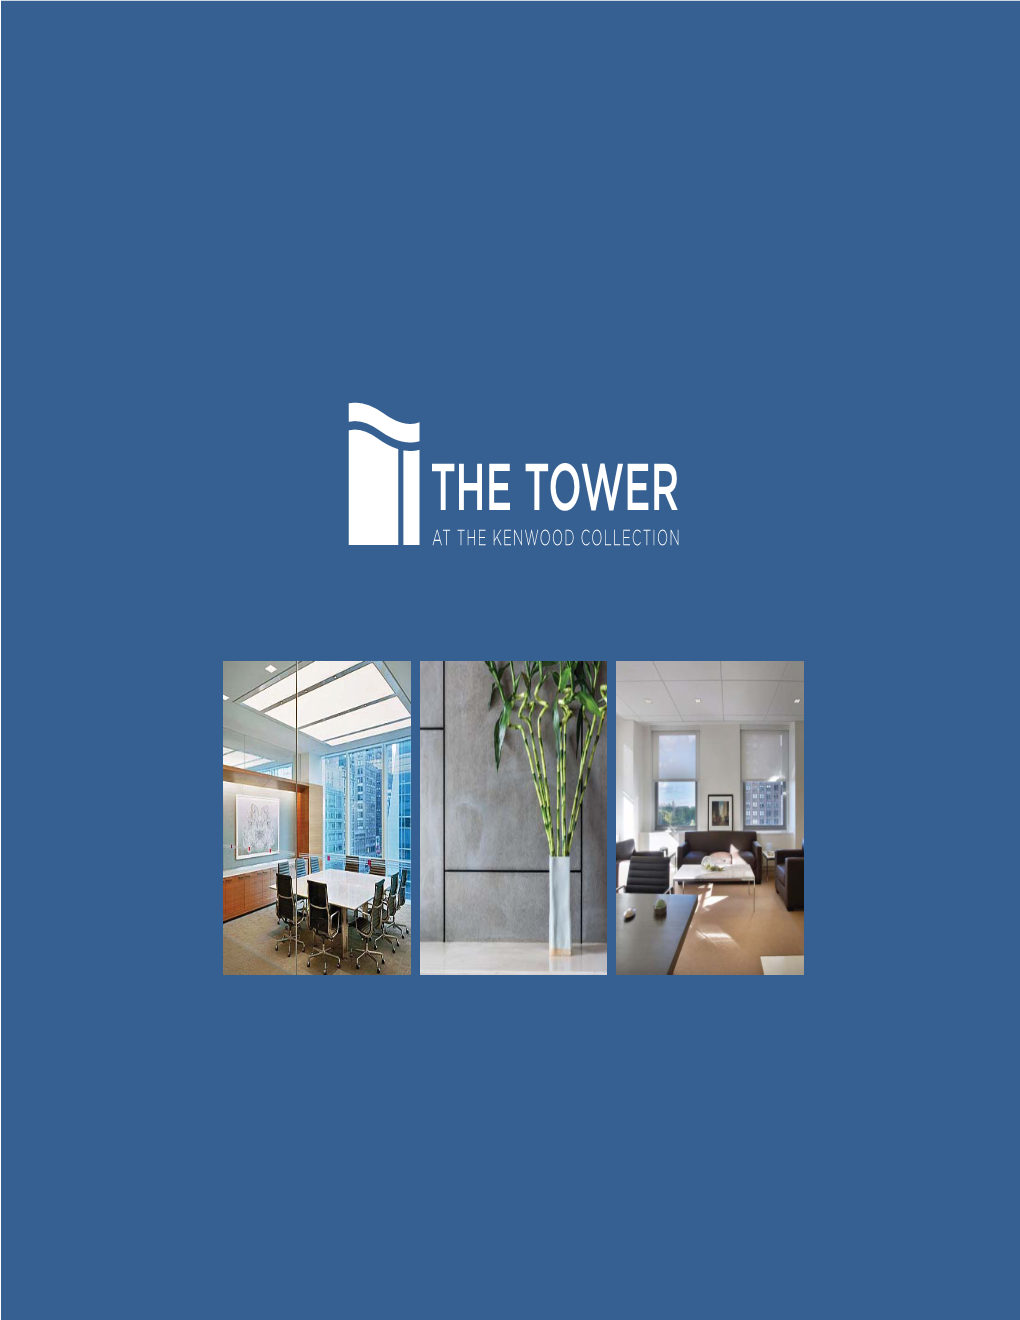 Introducing the Tower at the Kenwood Collection